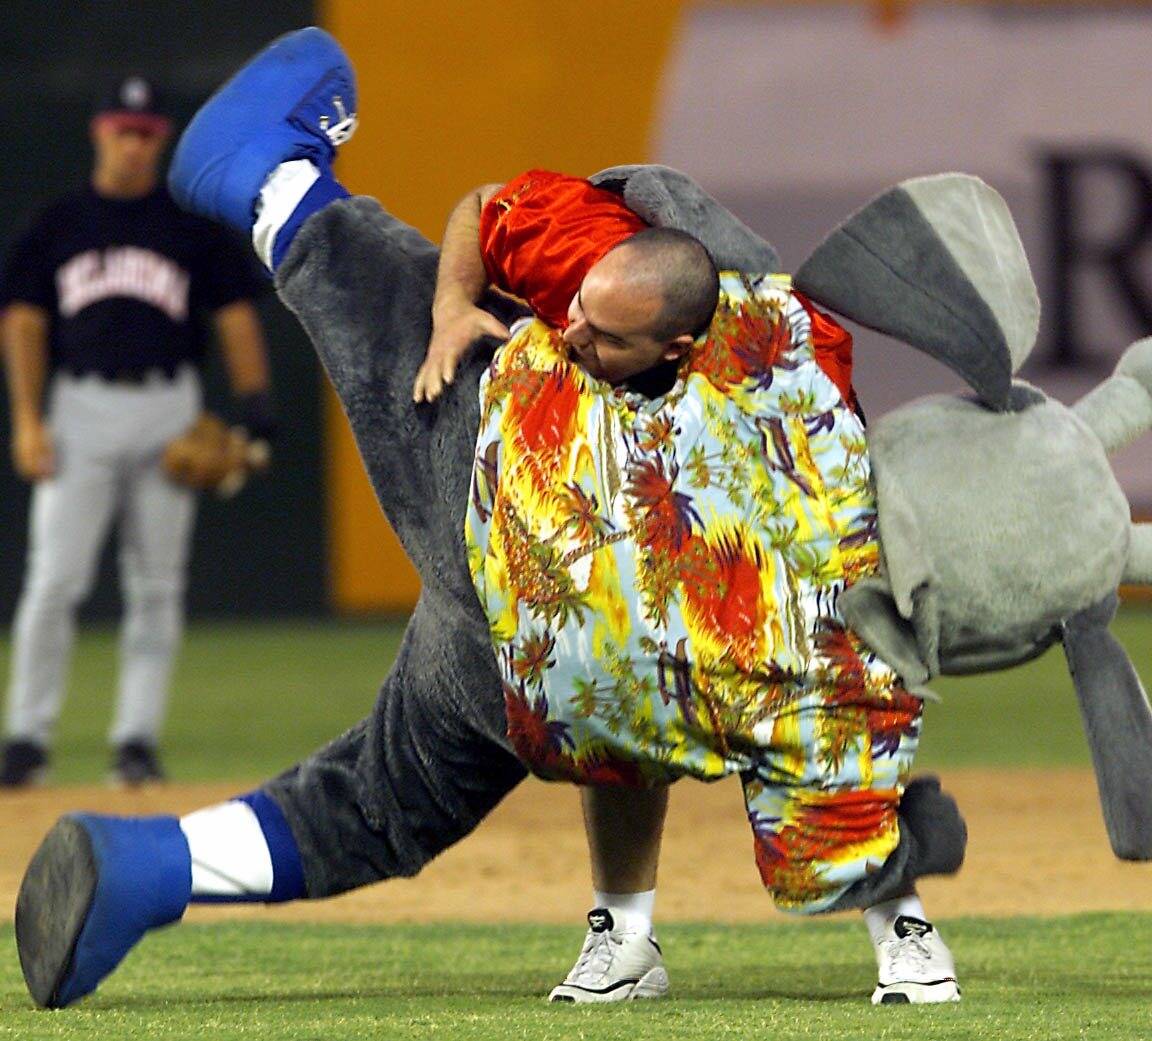 Mike Carroll tosses Las Vegas 51s mascot Cosmo during the "Beat The Mascot" race between inning ...